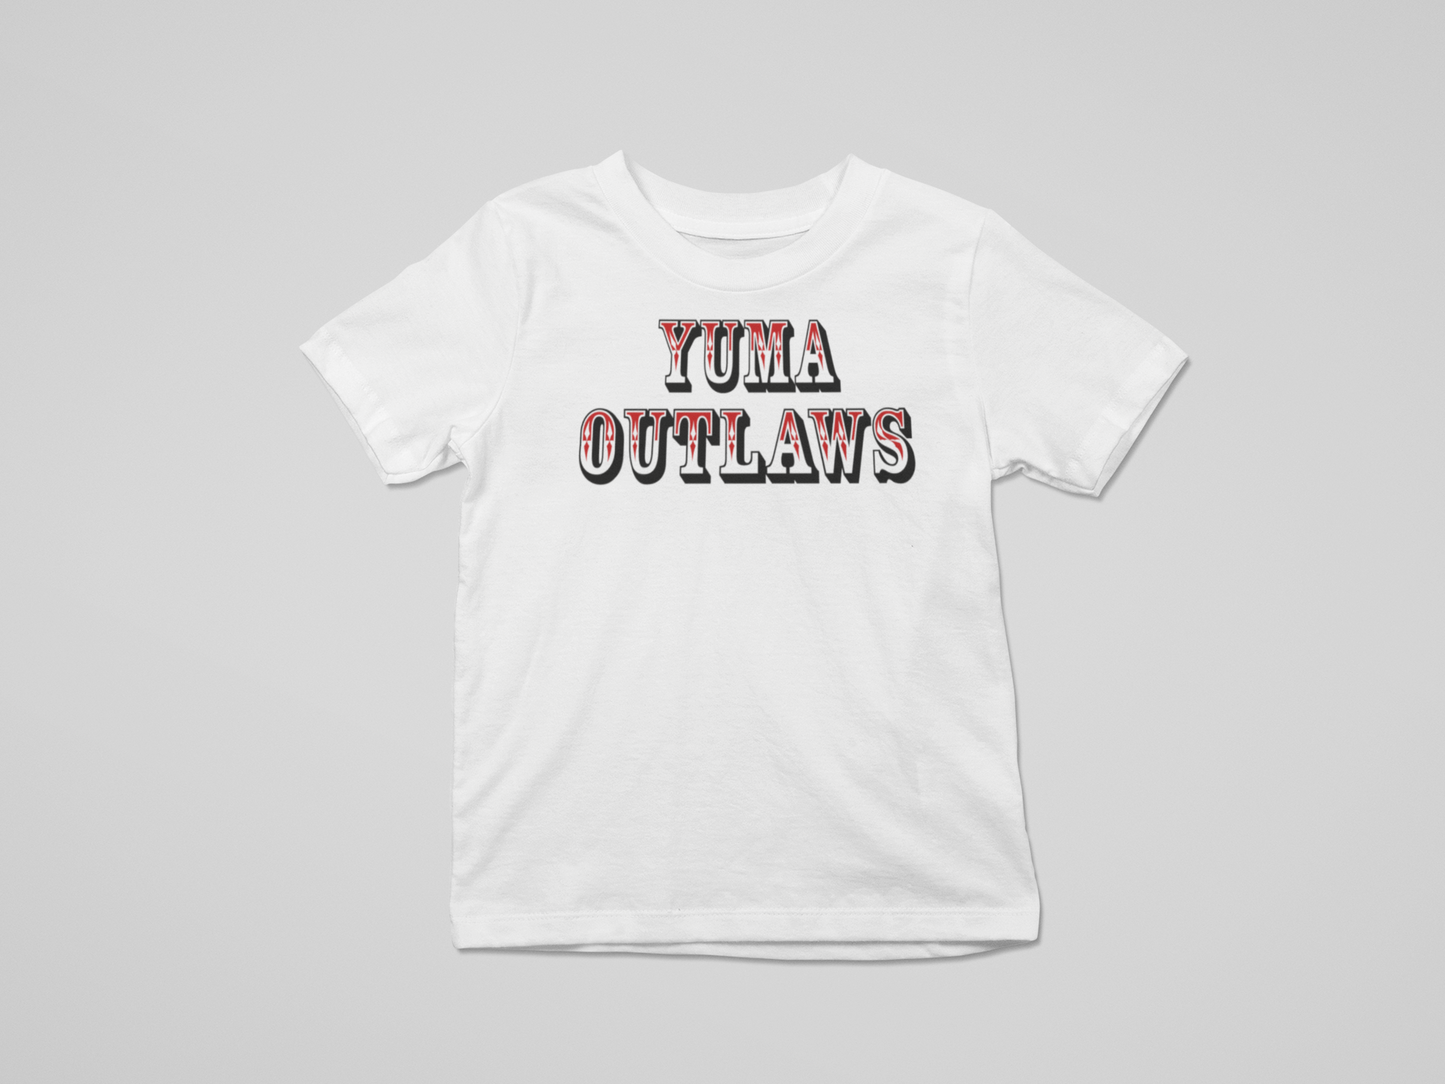 yuma outlaws infant t-shirt: for cute lil' outlaws only!